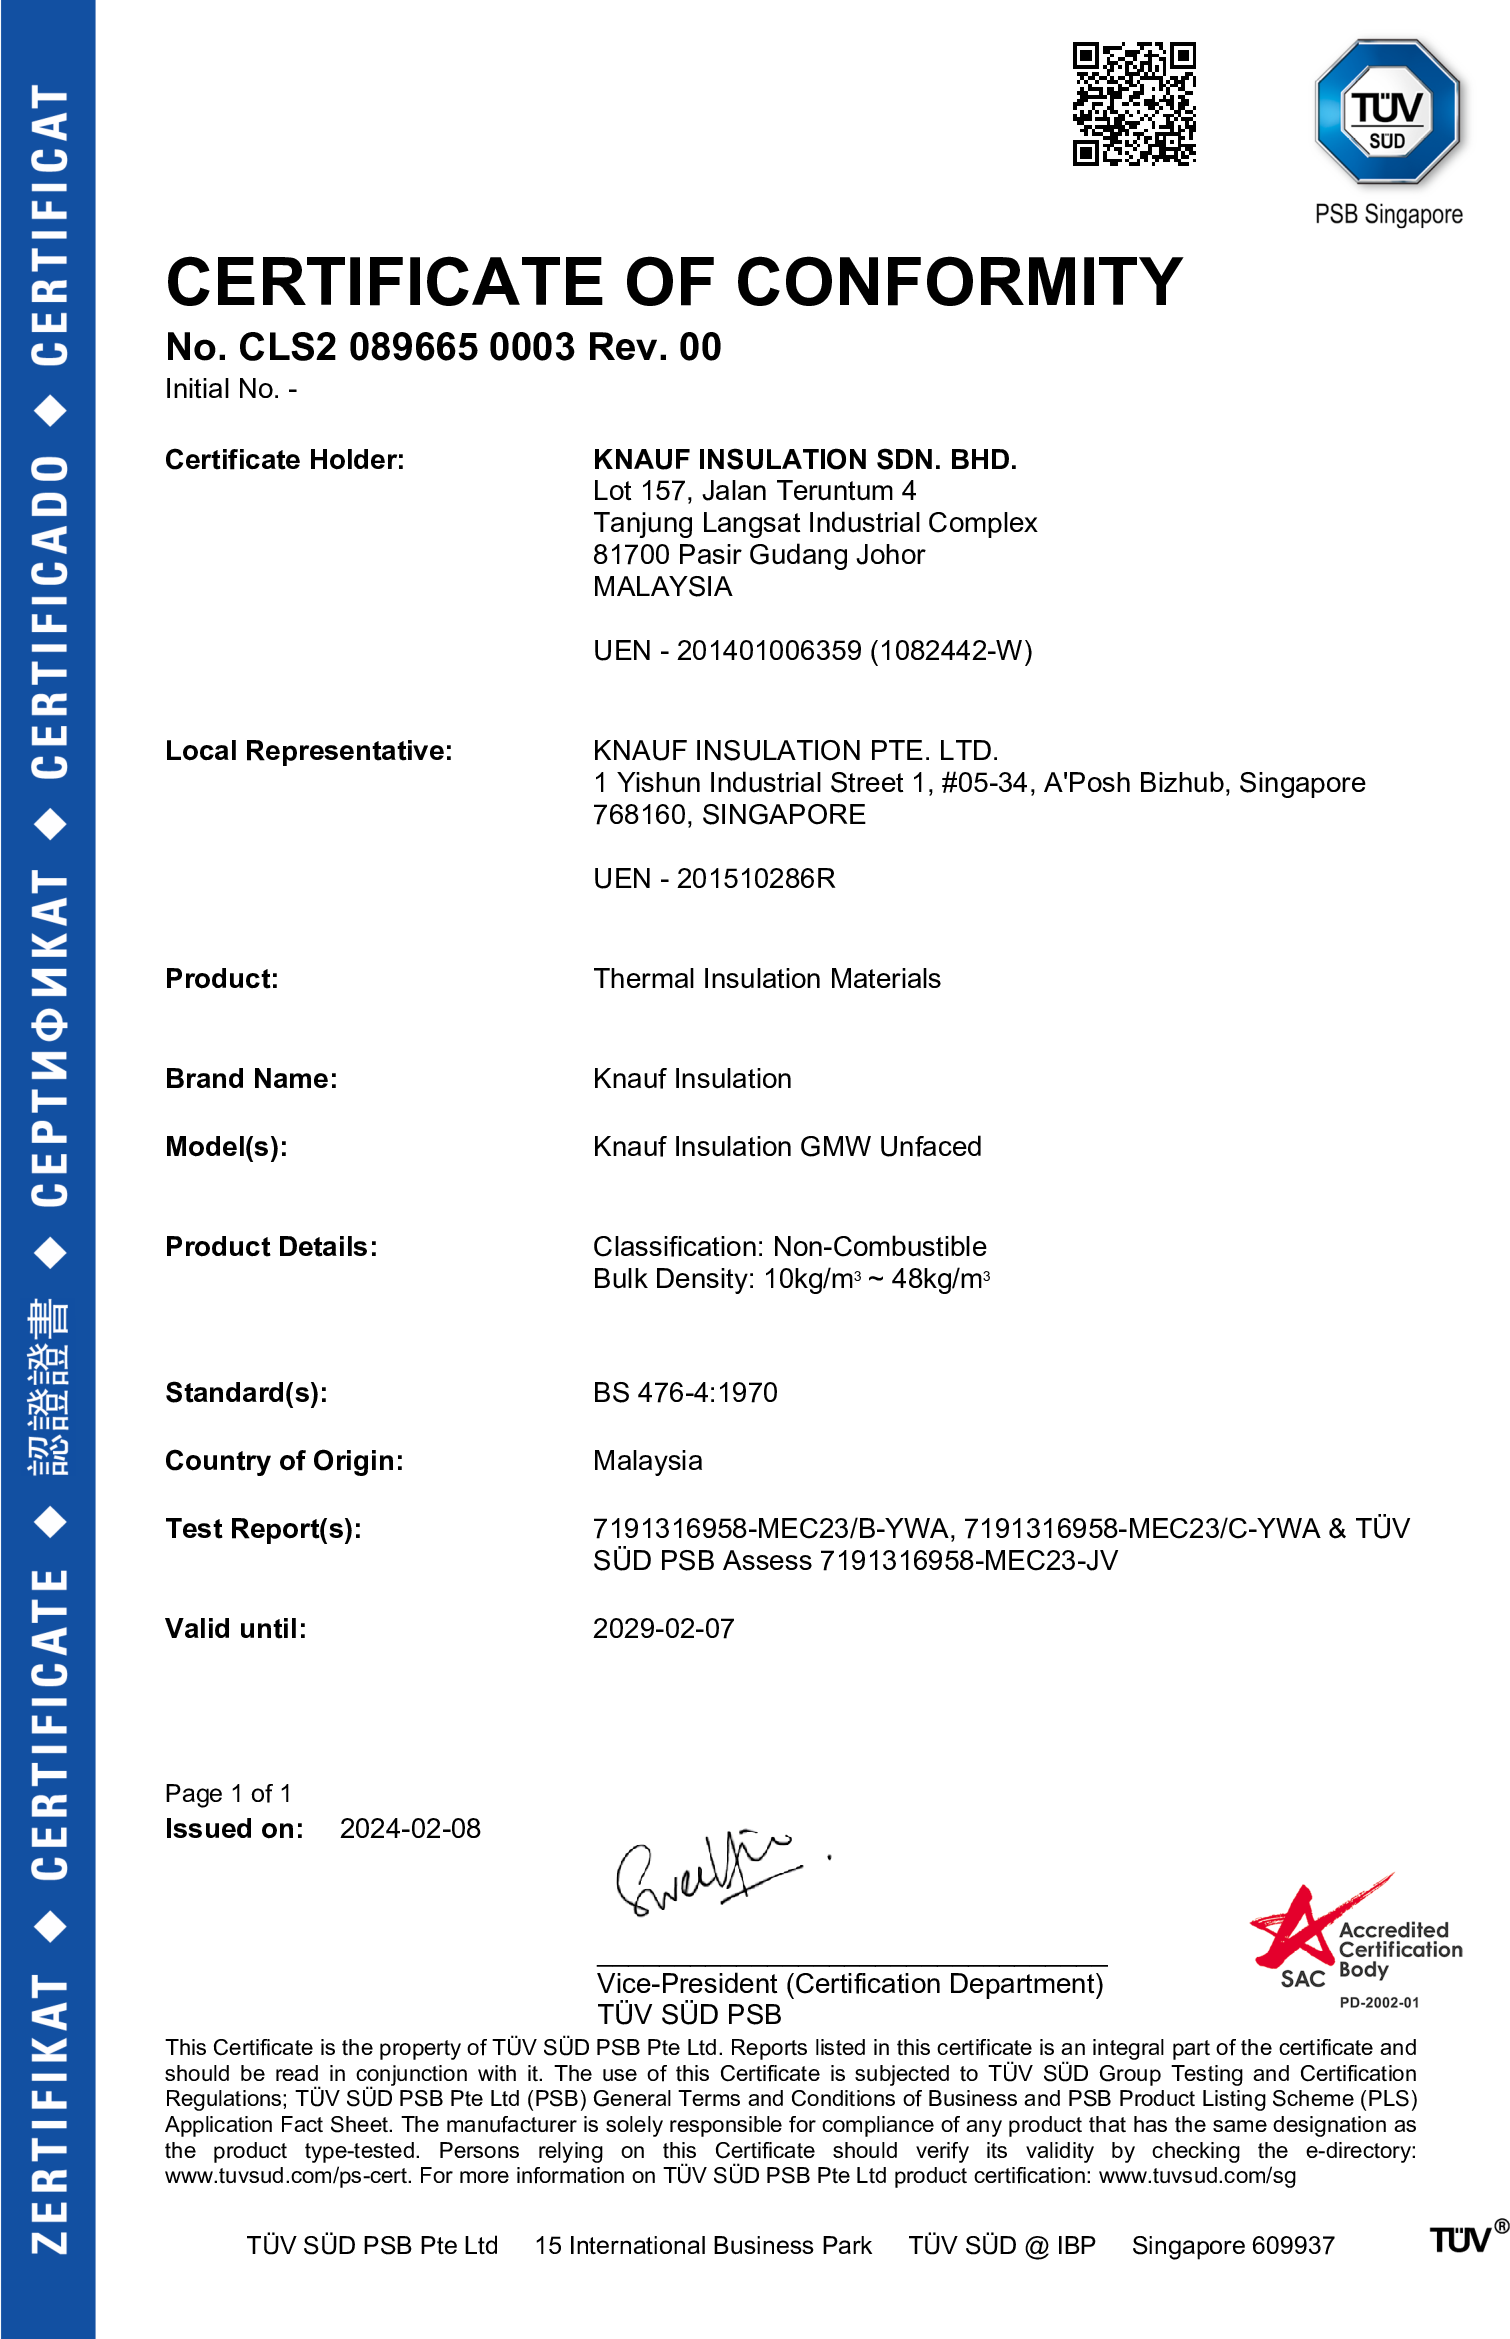 Unfaced Glasswool – Certificate of Conformity – 10-48kg/m3_50mm_ BS476-Part 4